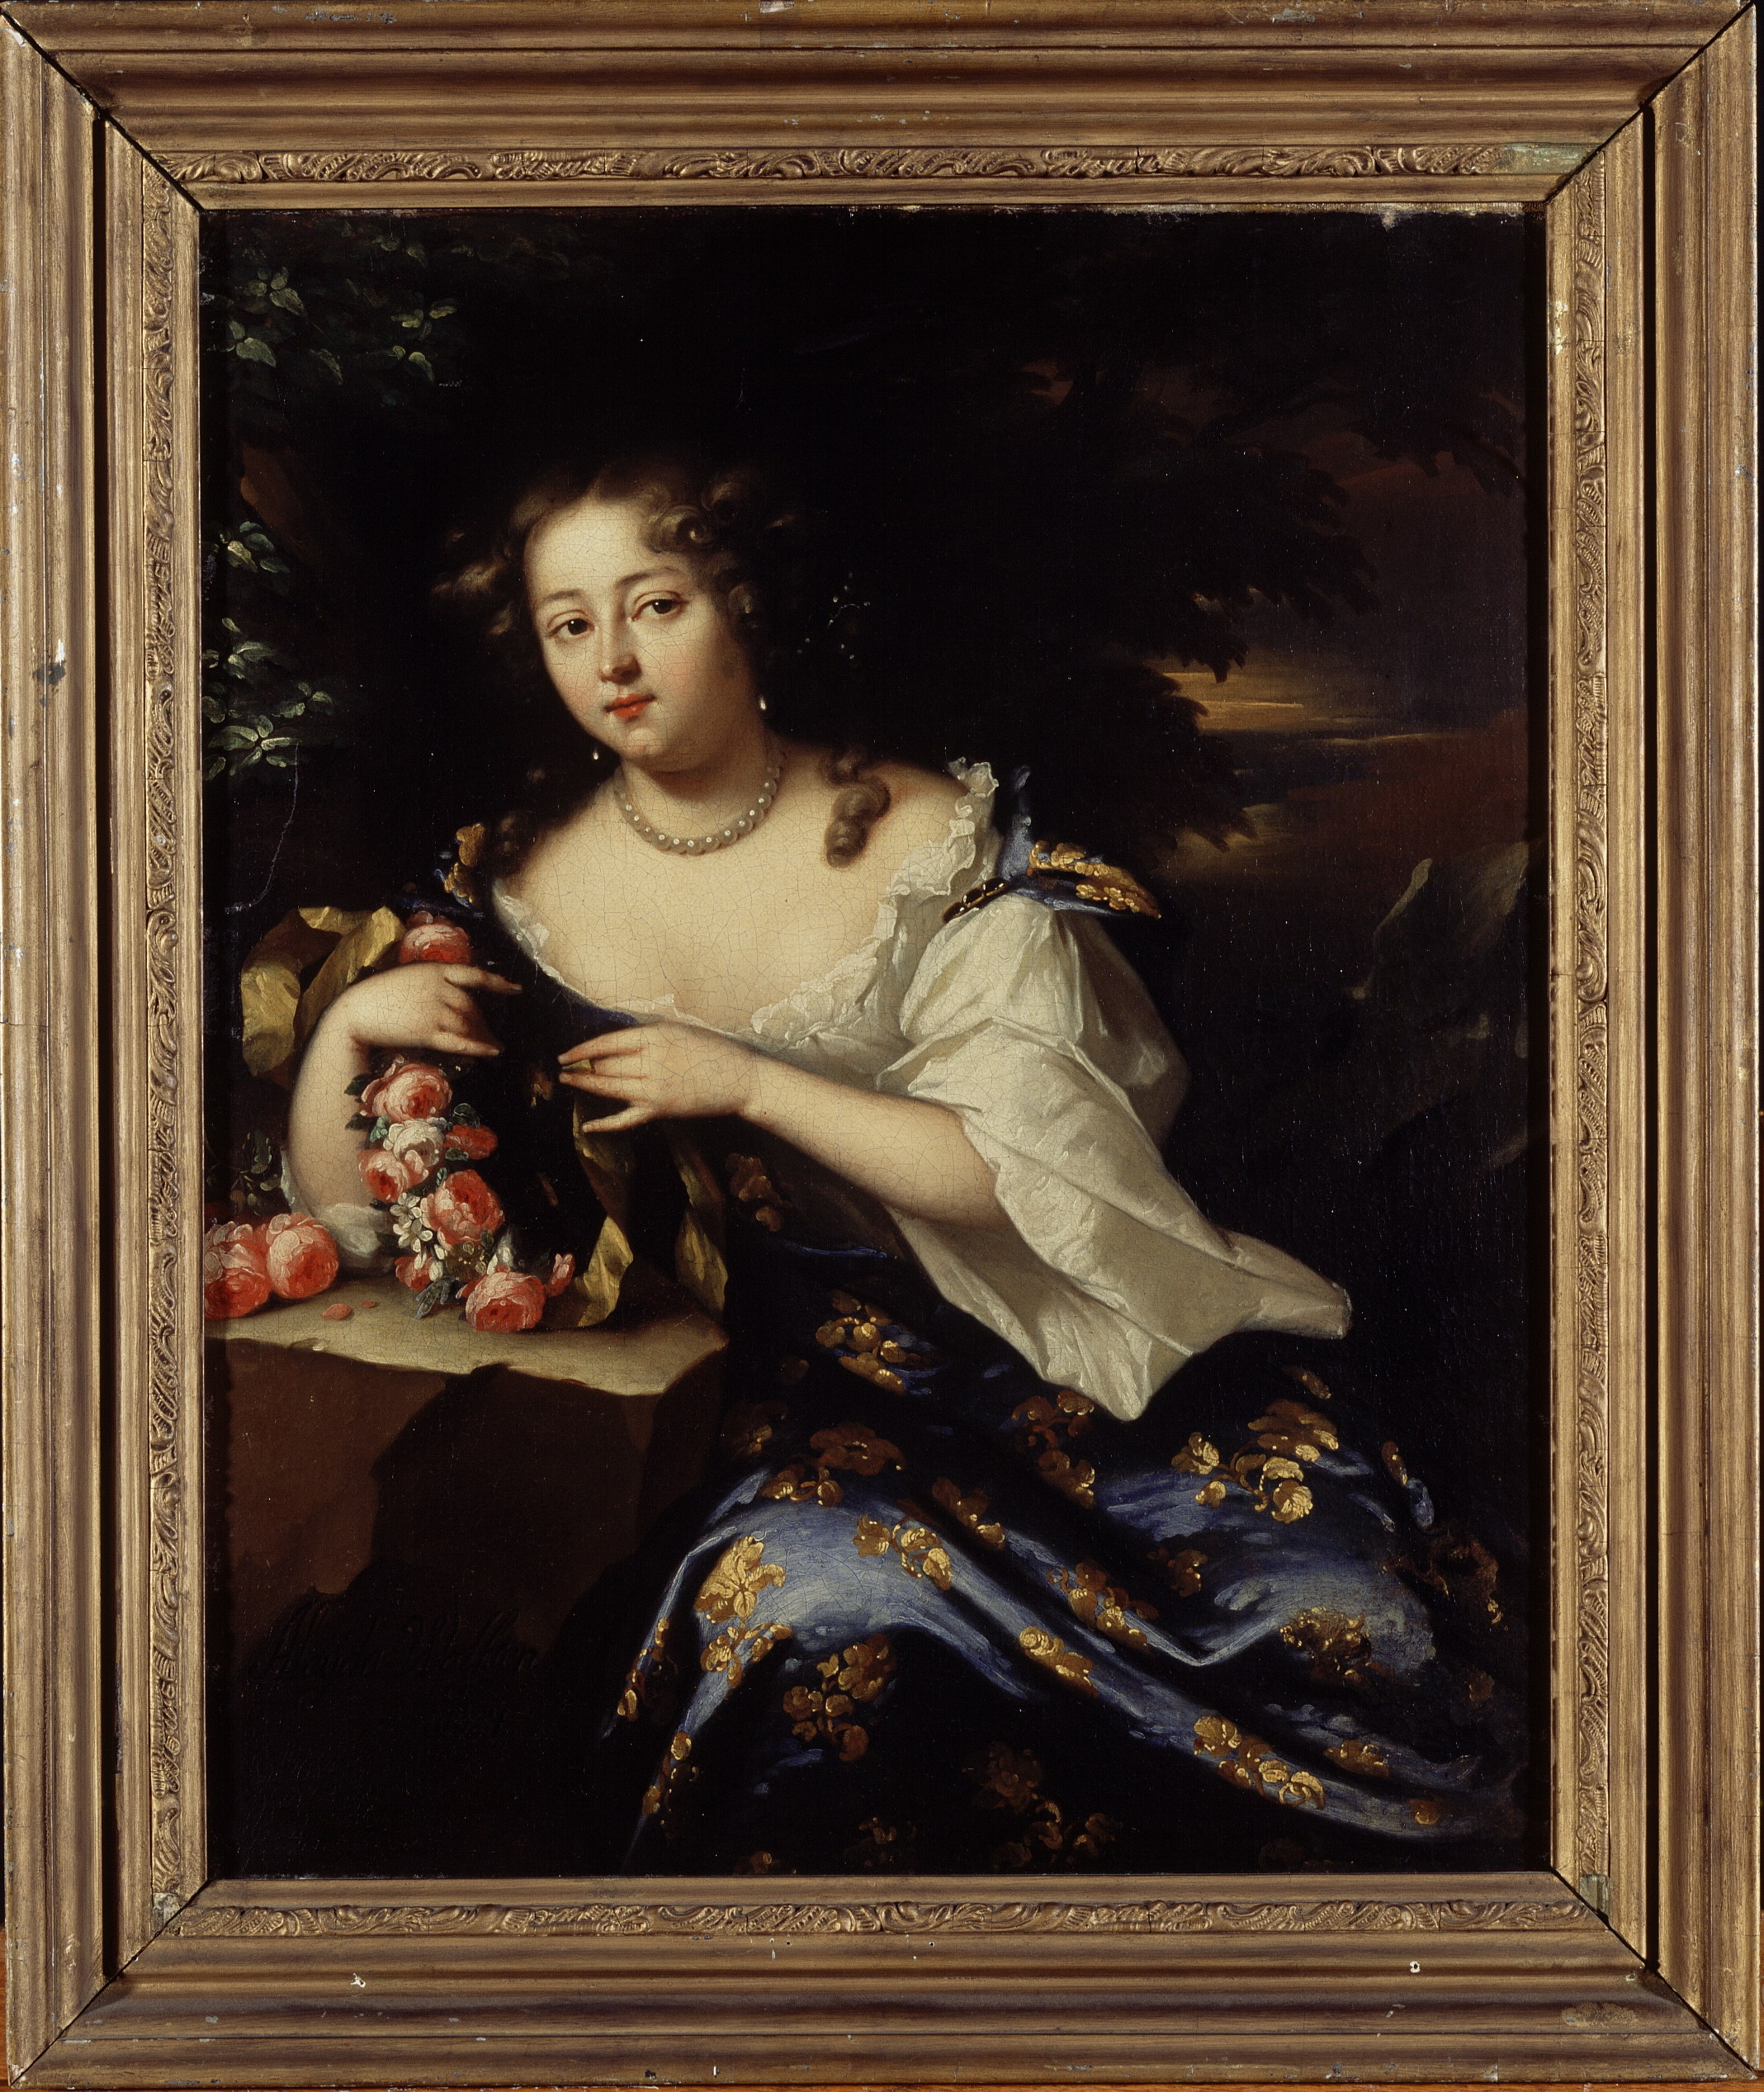 A portrait of a woman facing the viewer but looking off to her right with a slight, skeptical smile. She leans on a rock with her right elbow and holds a wreath of flowers in both hands. She is elegantly dressed and wears a pearl necklace with matching pearl earrings.